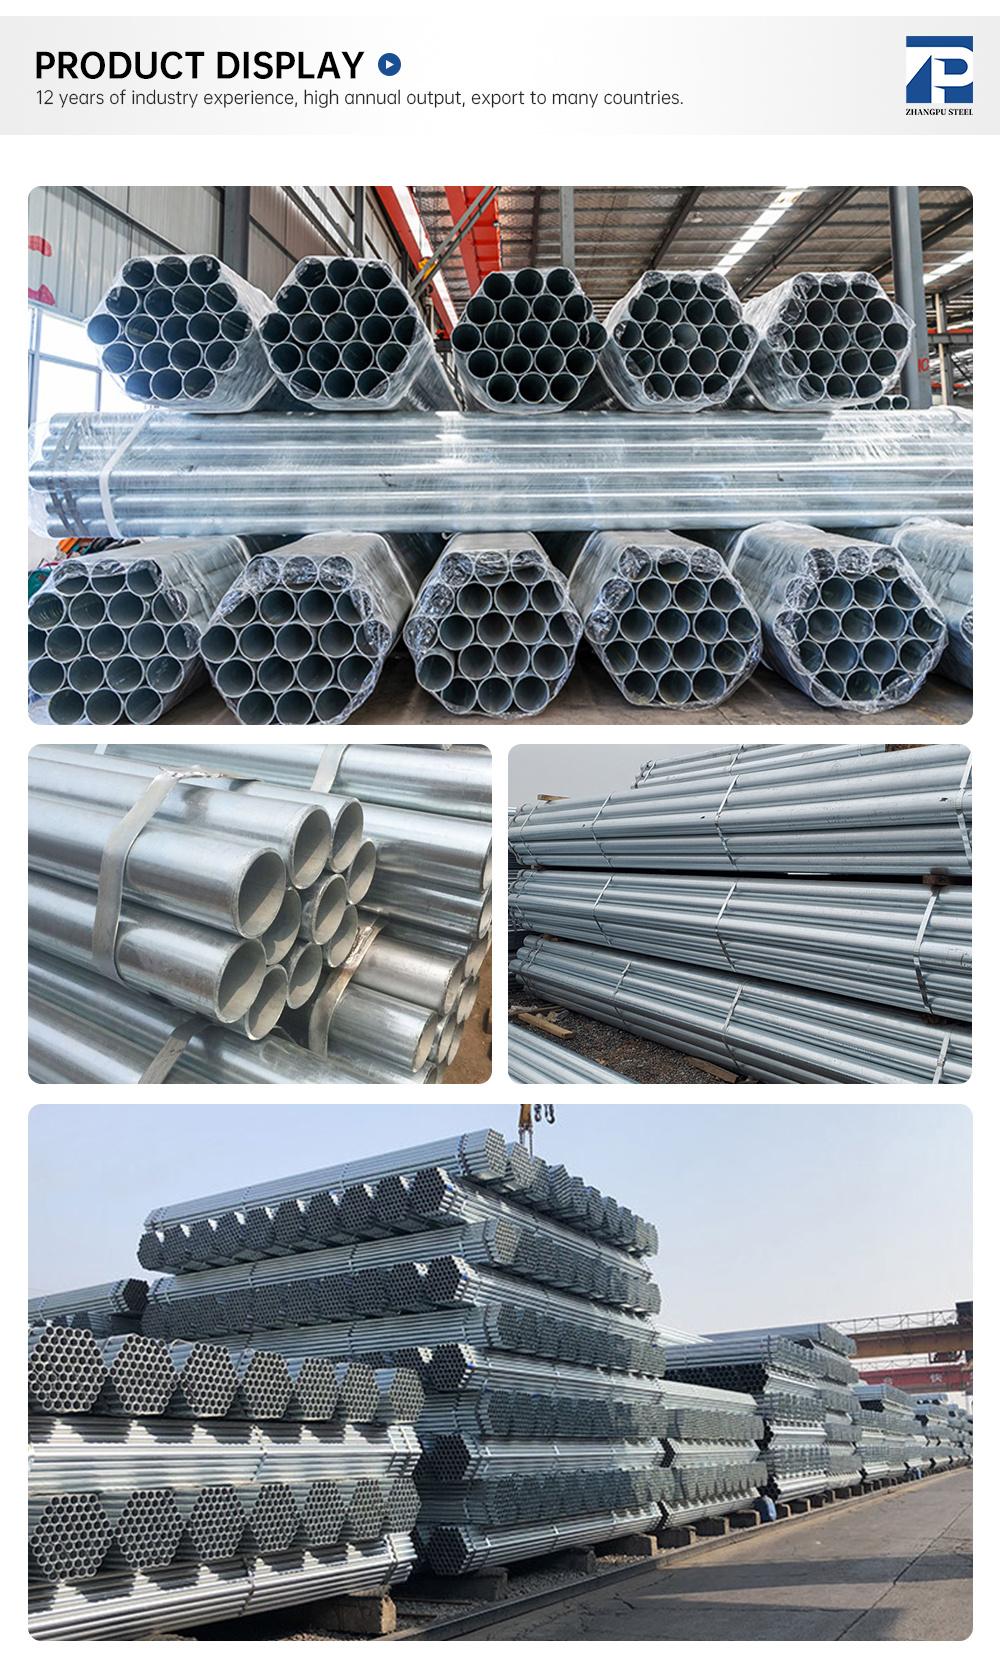 High Quality ERW Steel Pipe, ERW Seamless Carbon Steel Pipe for Waterworks